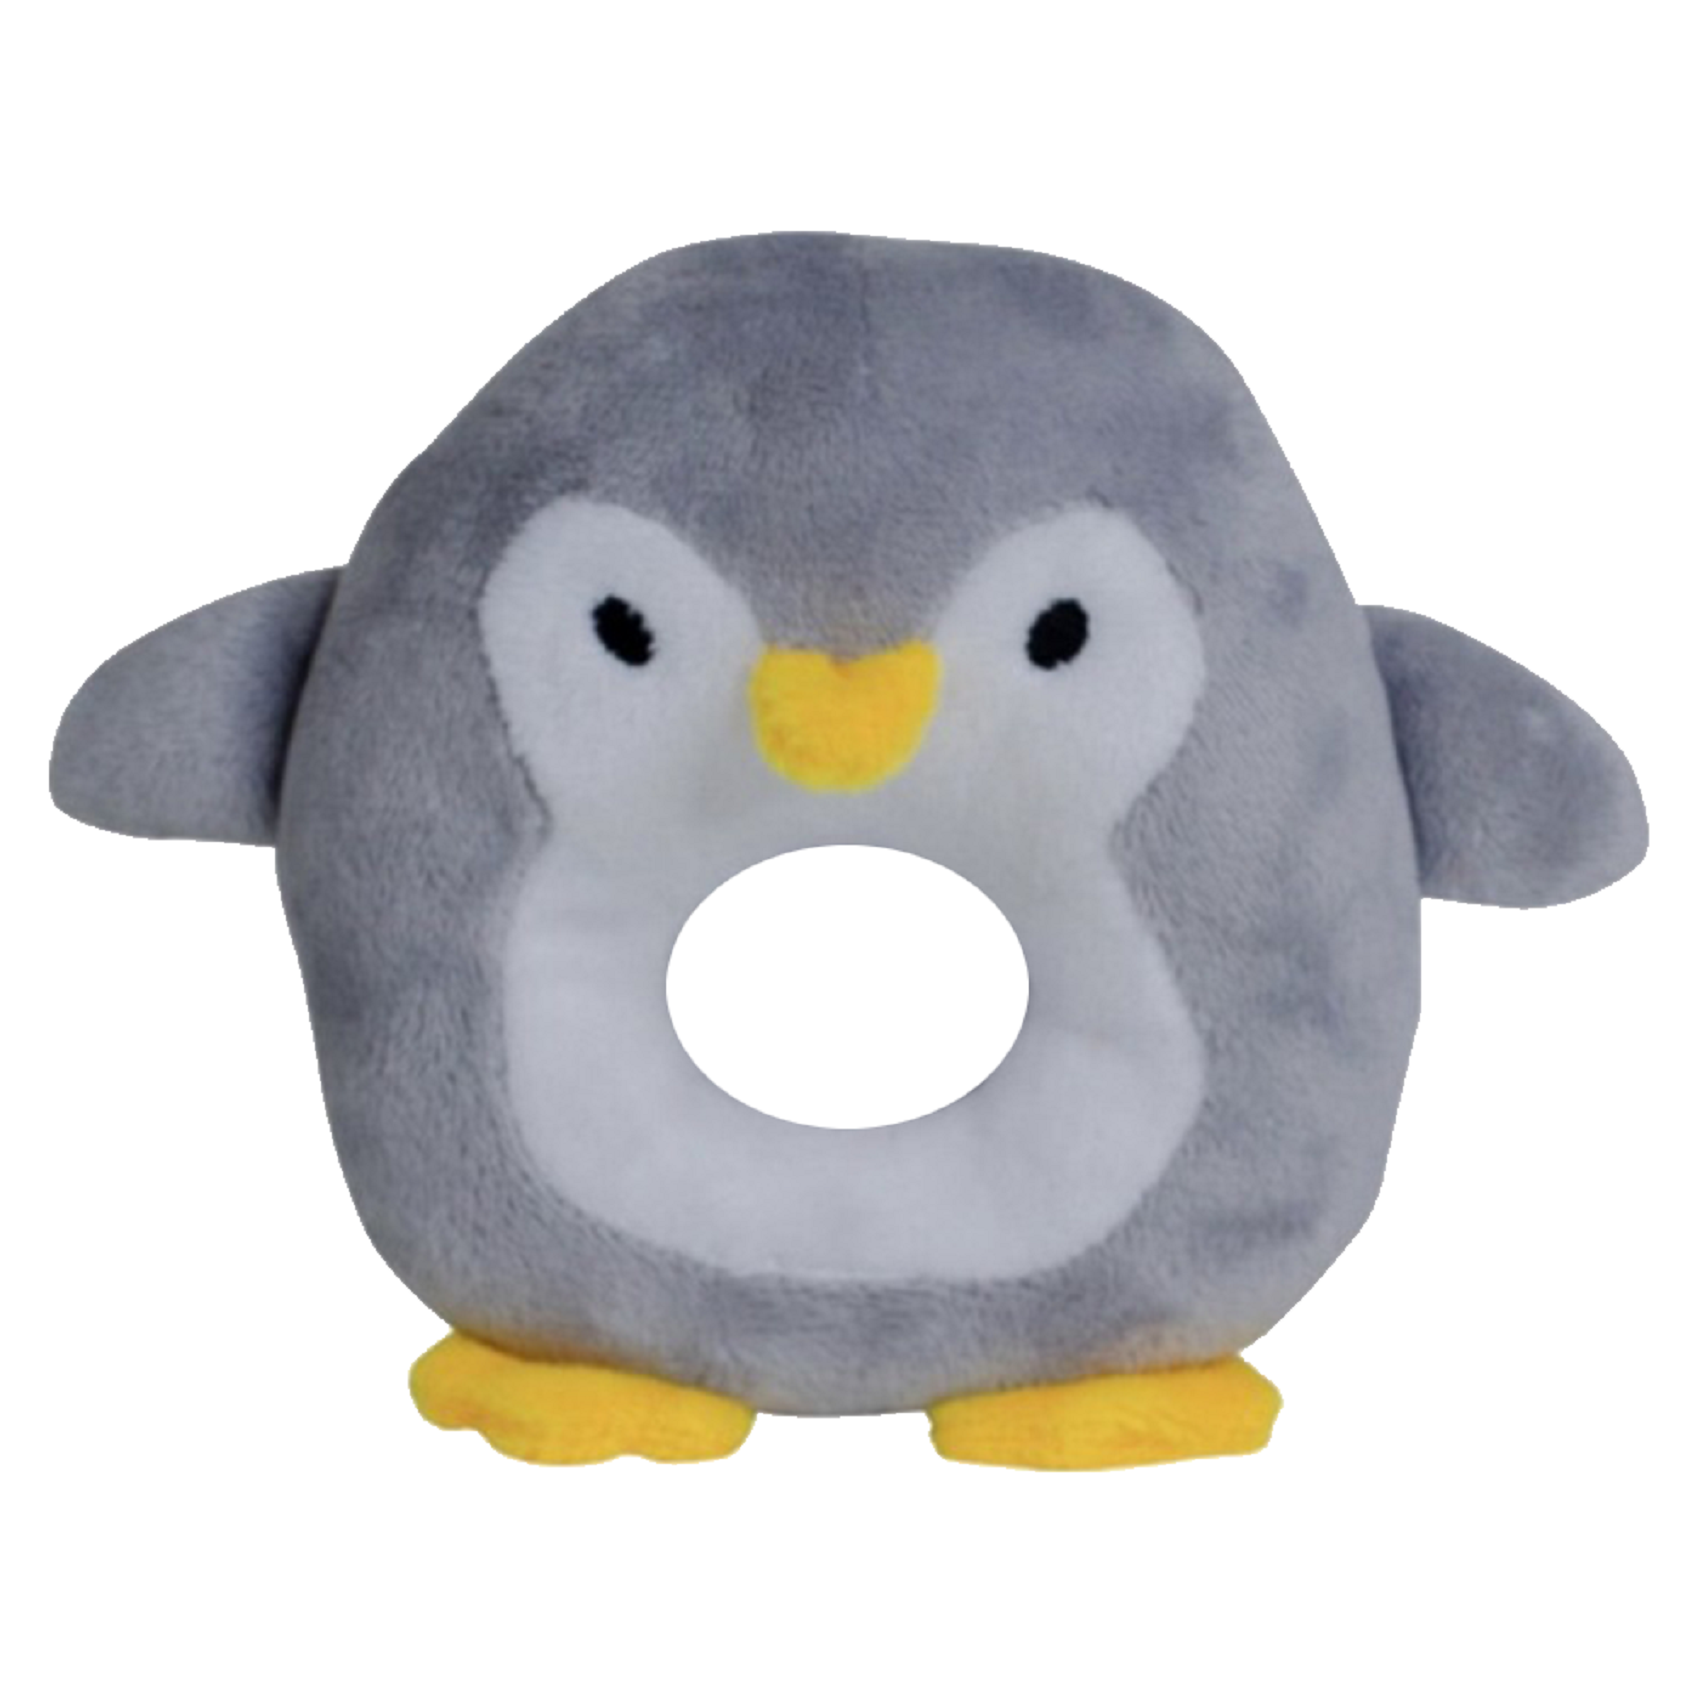 Baby Works - Bibibaby Cuddle Rattle - Percy Penguin